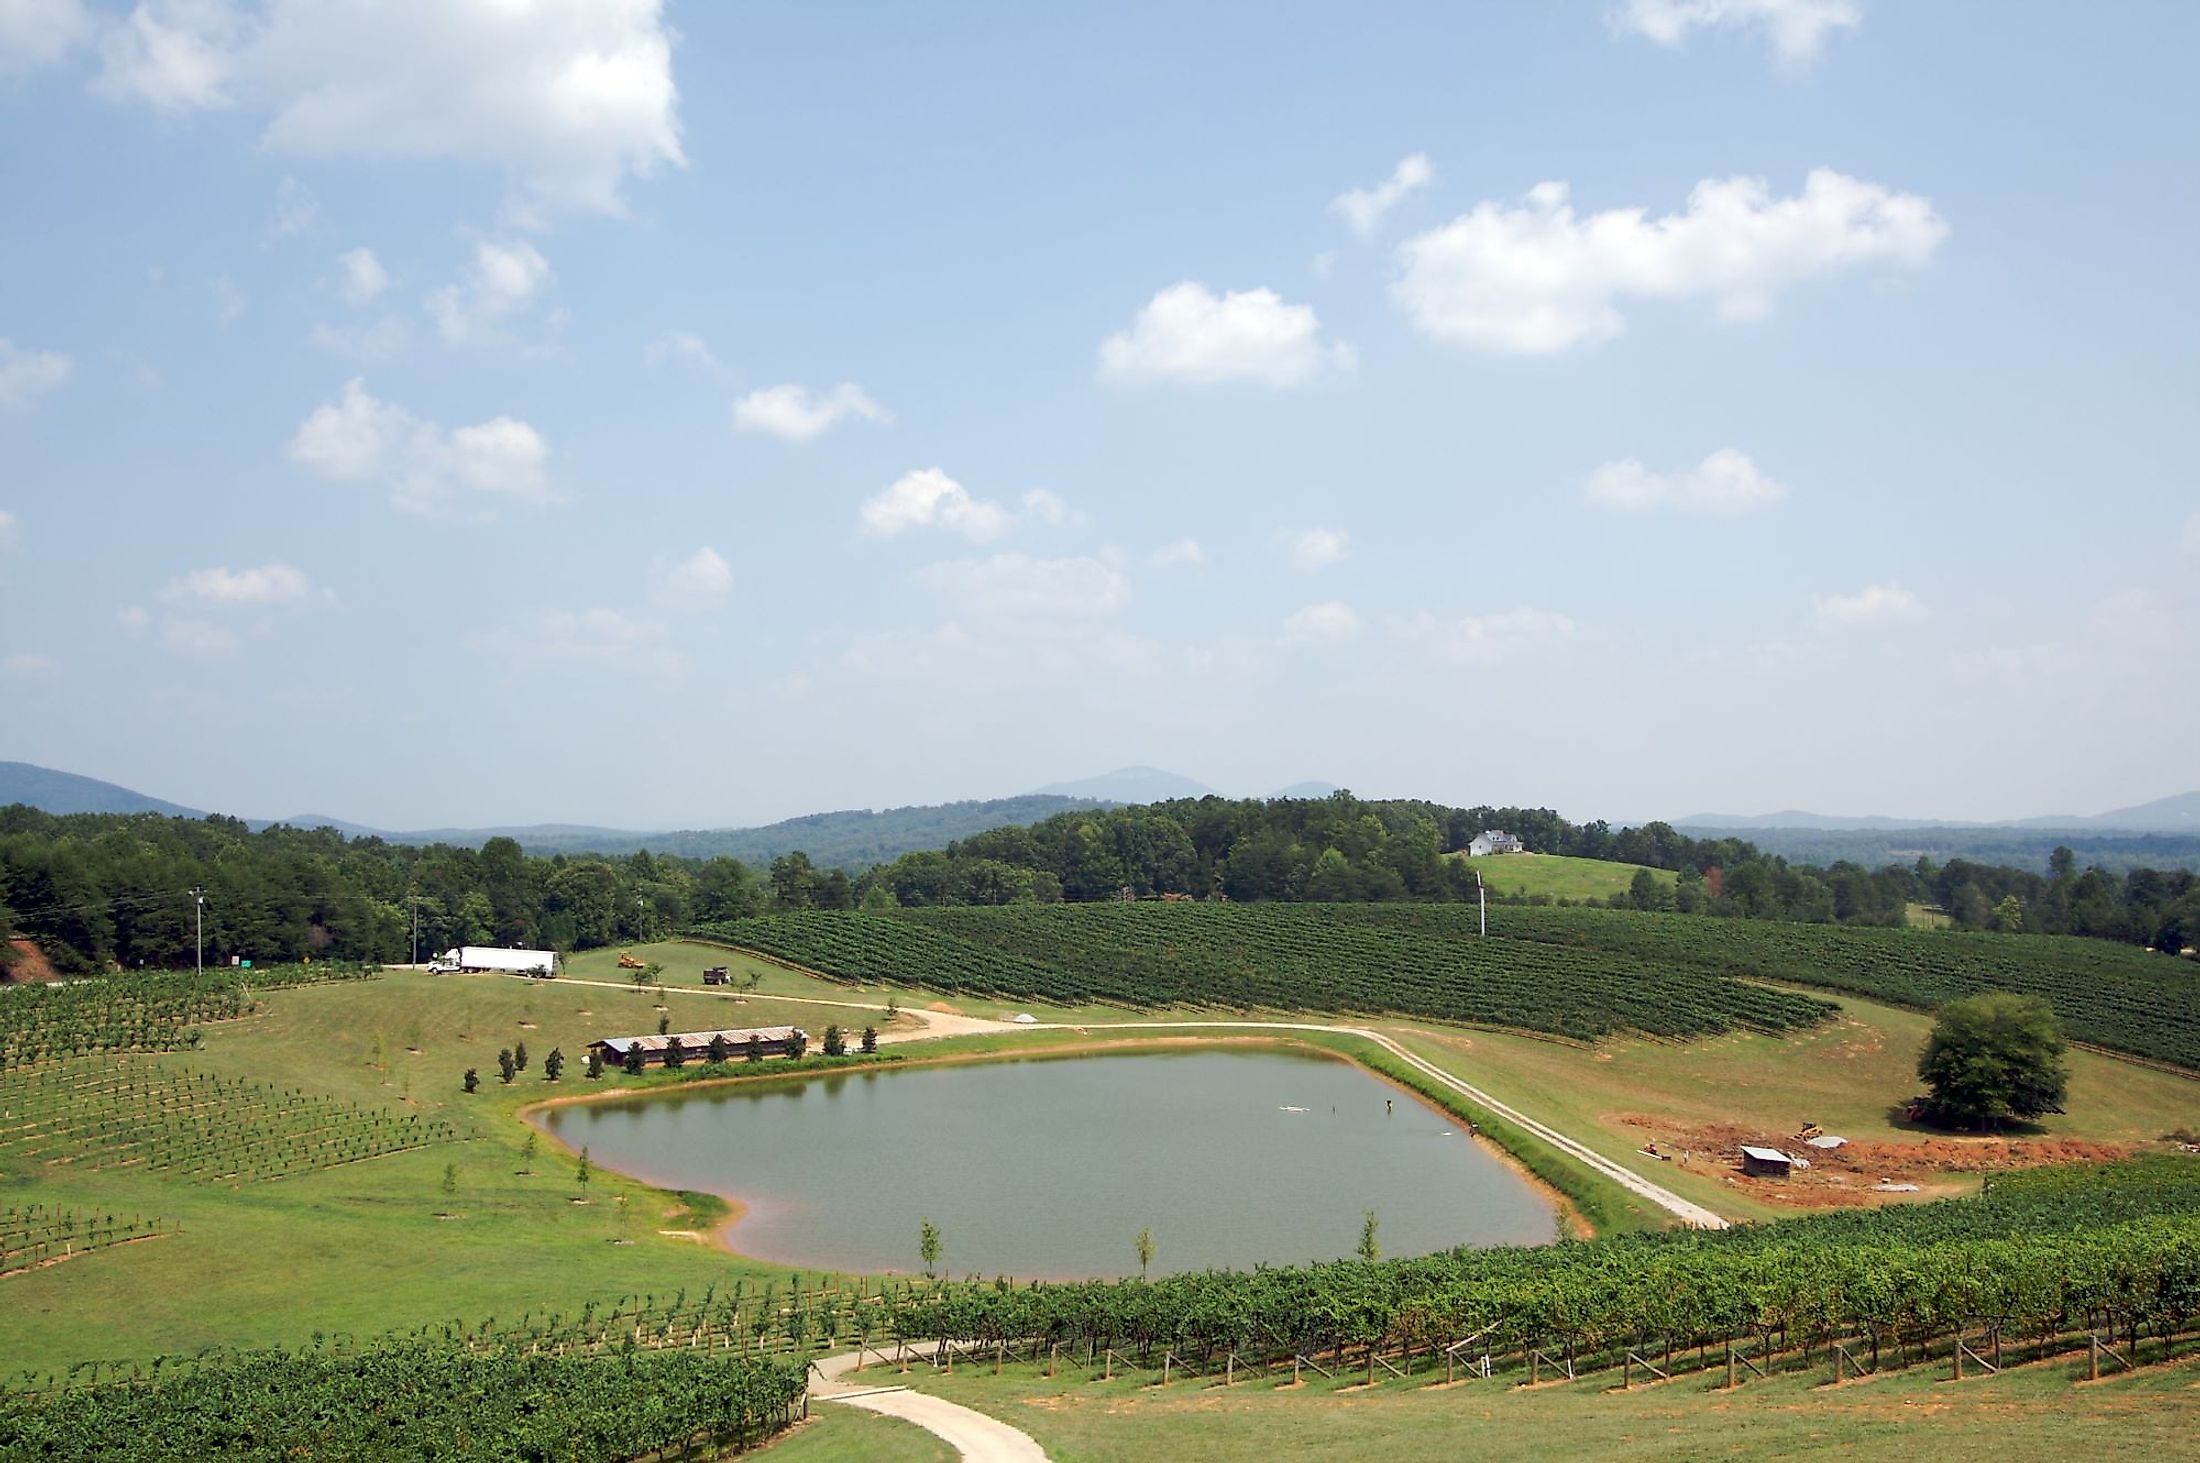 Landscape with a pond and vineyard in Georgia.